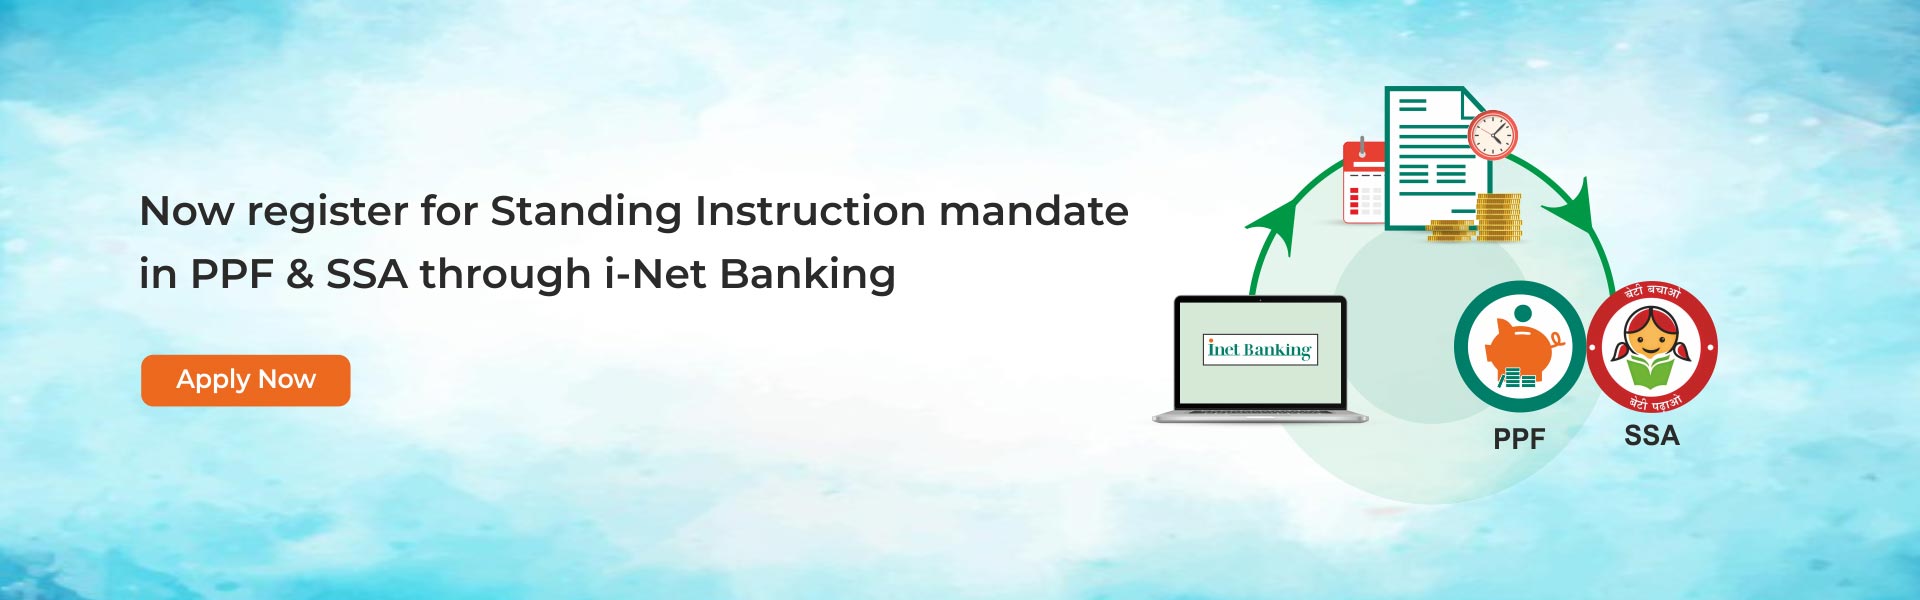 Standing Instruction facility for PPF & SSA account holders